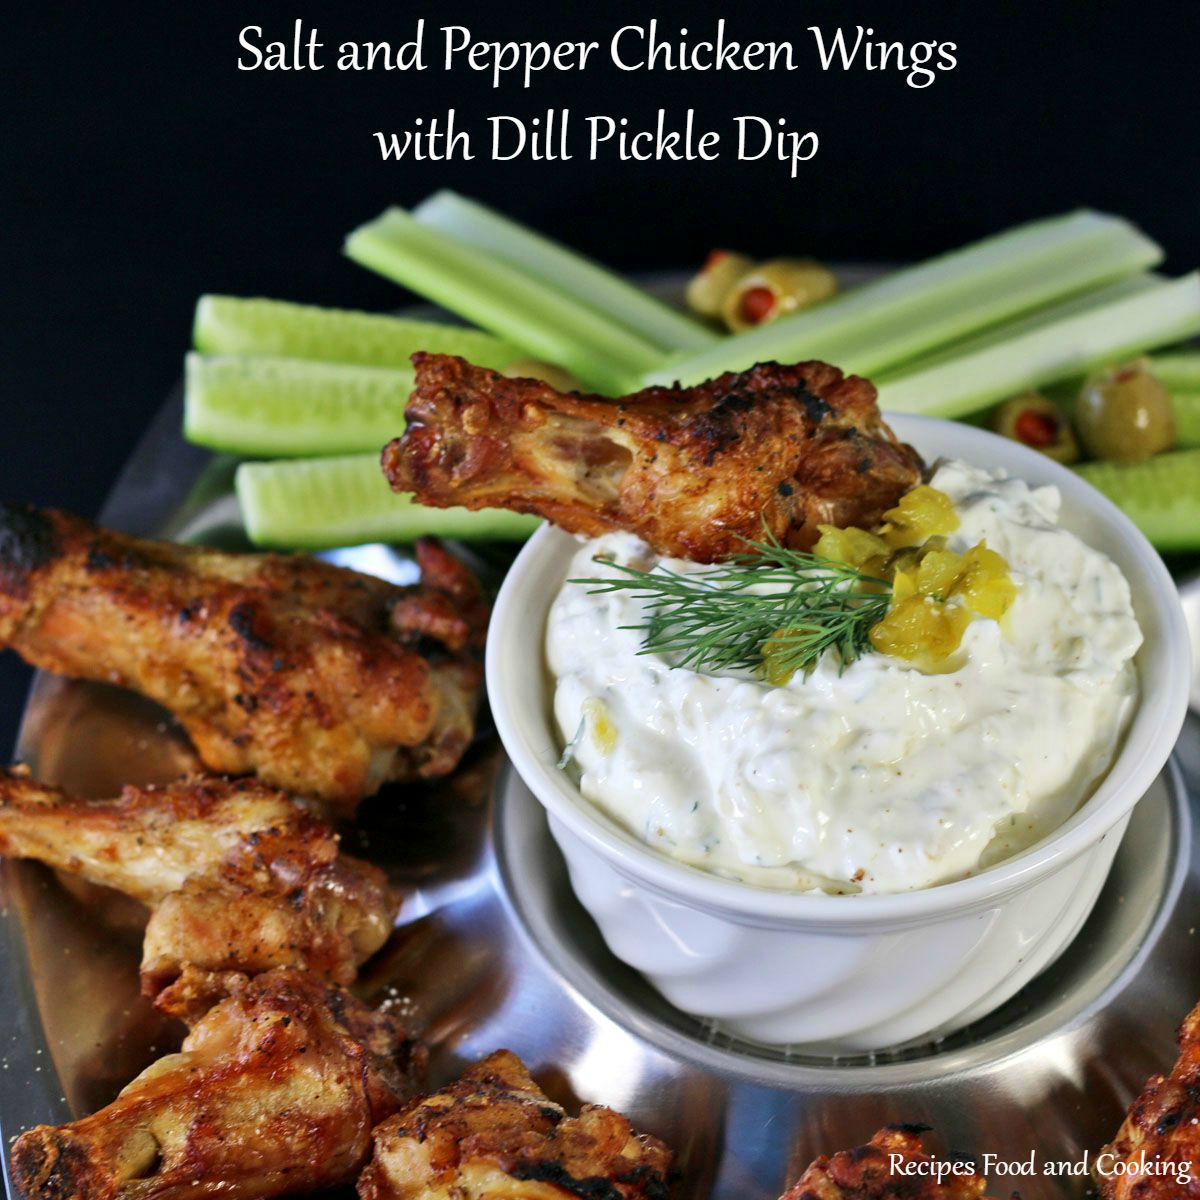 Salt and Pepper Chicken Wings with Dill Pickle Dip